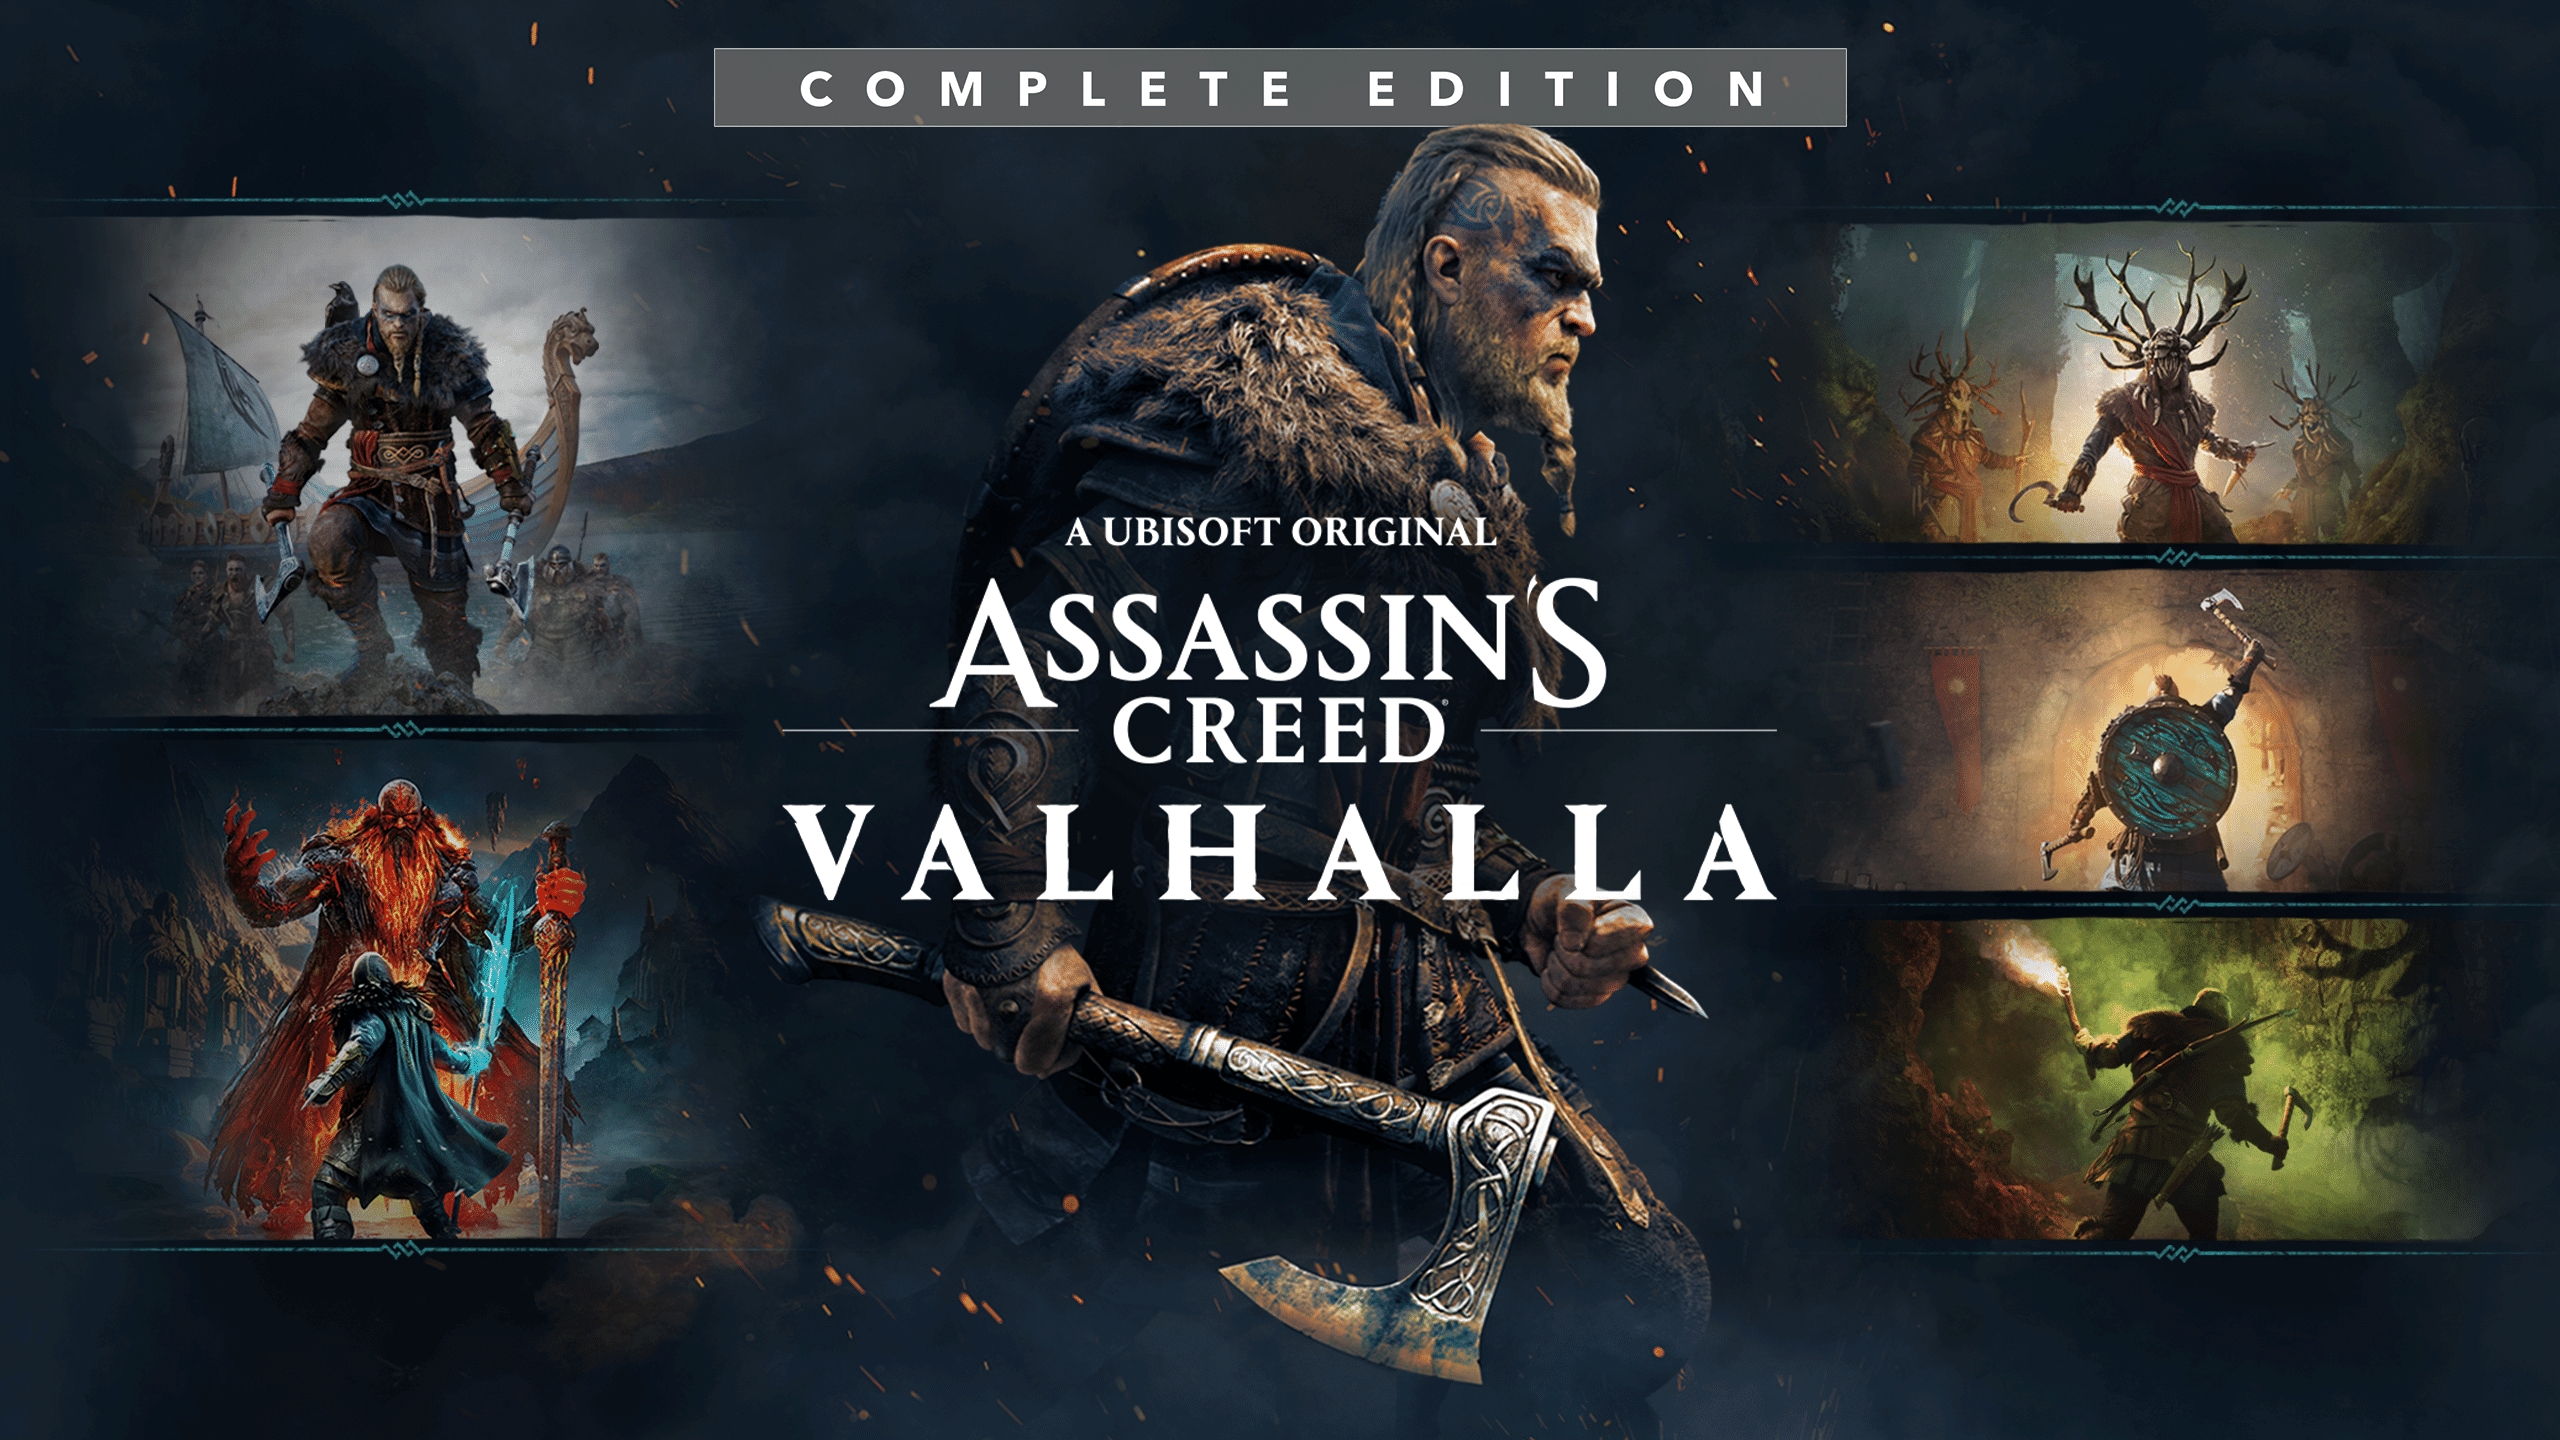 Assassin's Creed Valhalla Review: One of the Good Ones